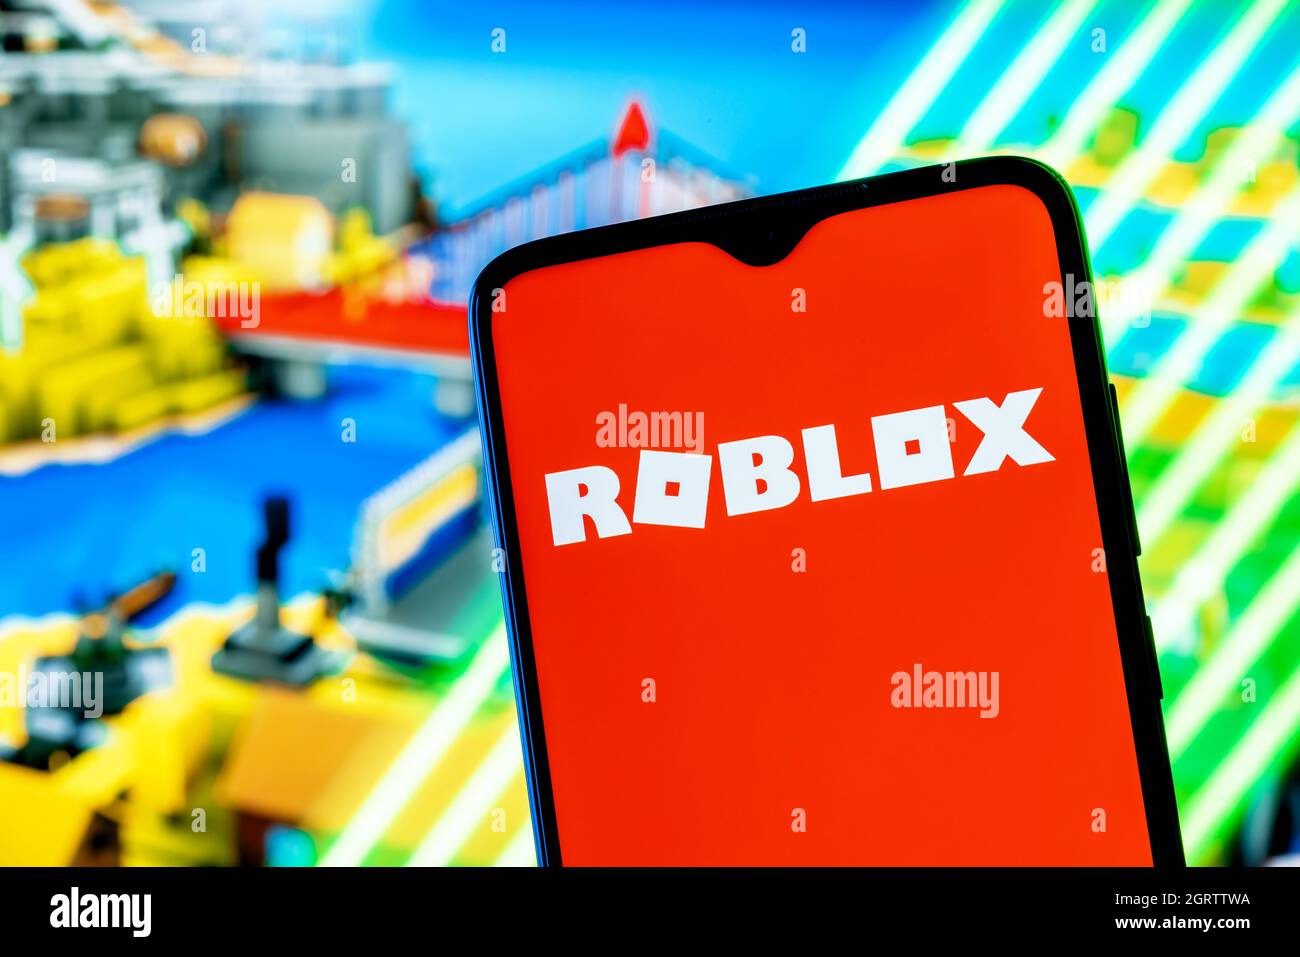 https://c8.alamy.com/comp/2GRTTWA/roblox-is-an-online-game-platform-and-game-creation-system-roblox-logo-on-smartphone-screen-a-frame-from-the-roblox-game-on-the-background-2GRTTWA.jpg